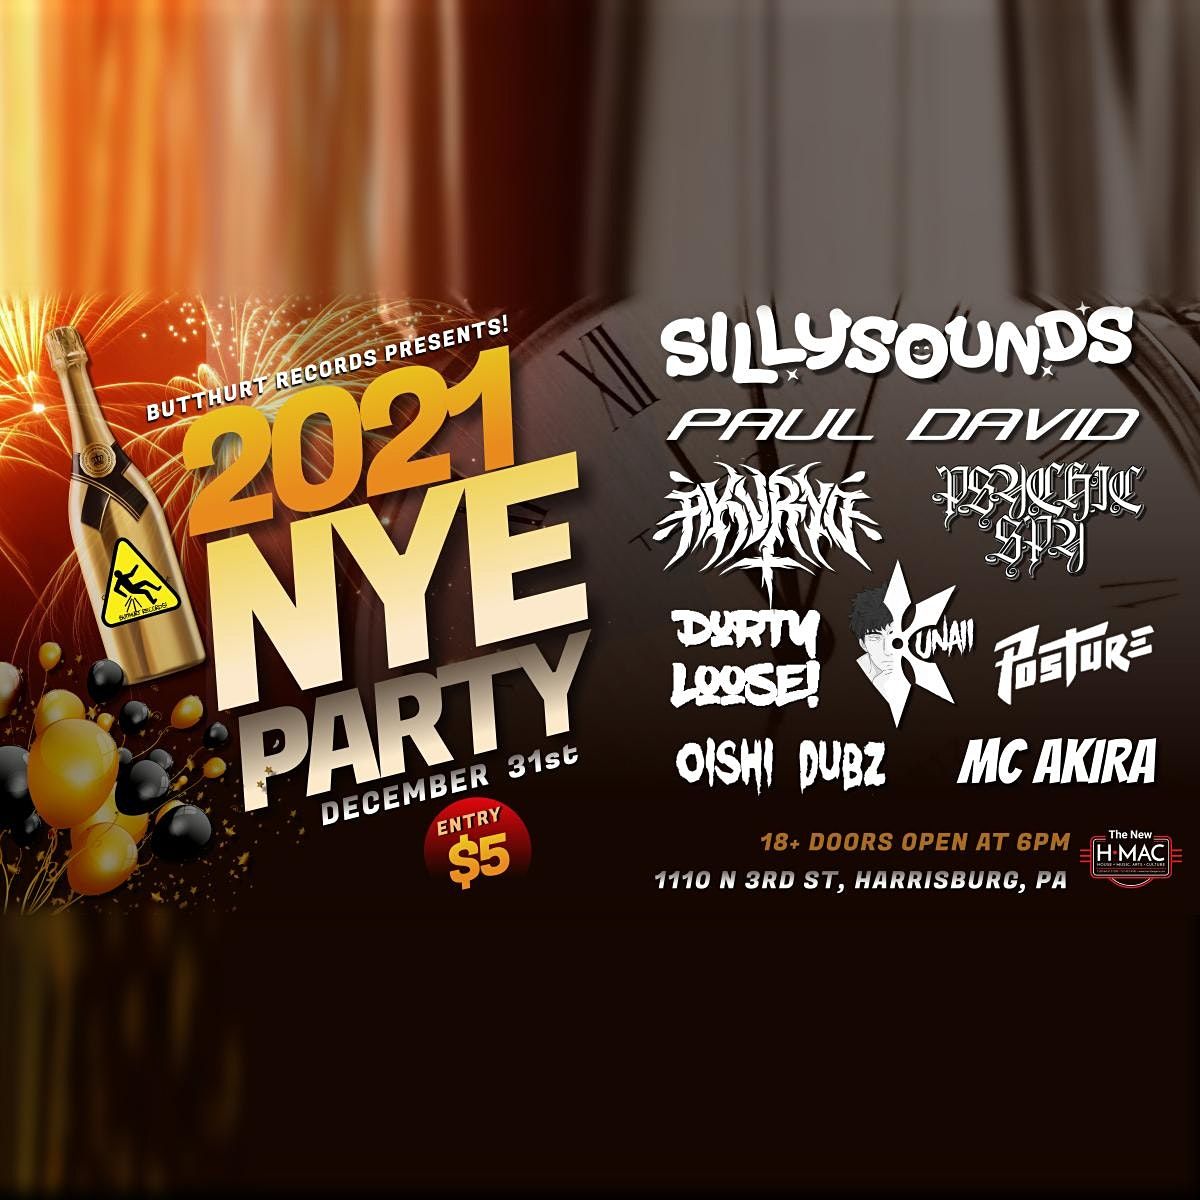 New Years Eve EDM Party at the Harrisburg Midtown Arts Center, The